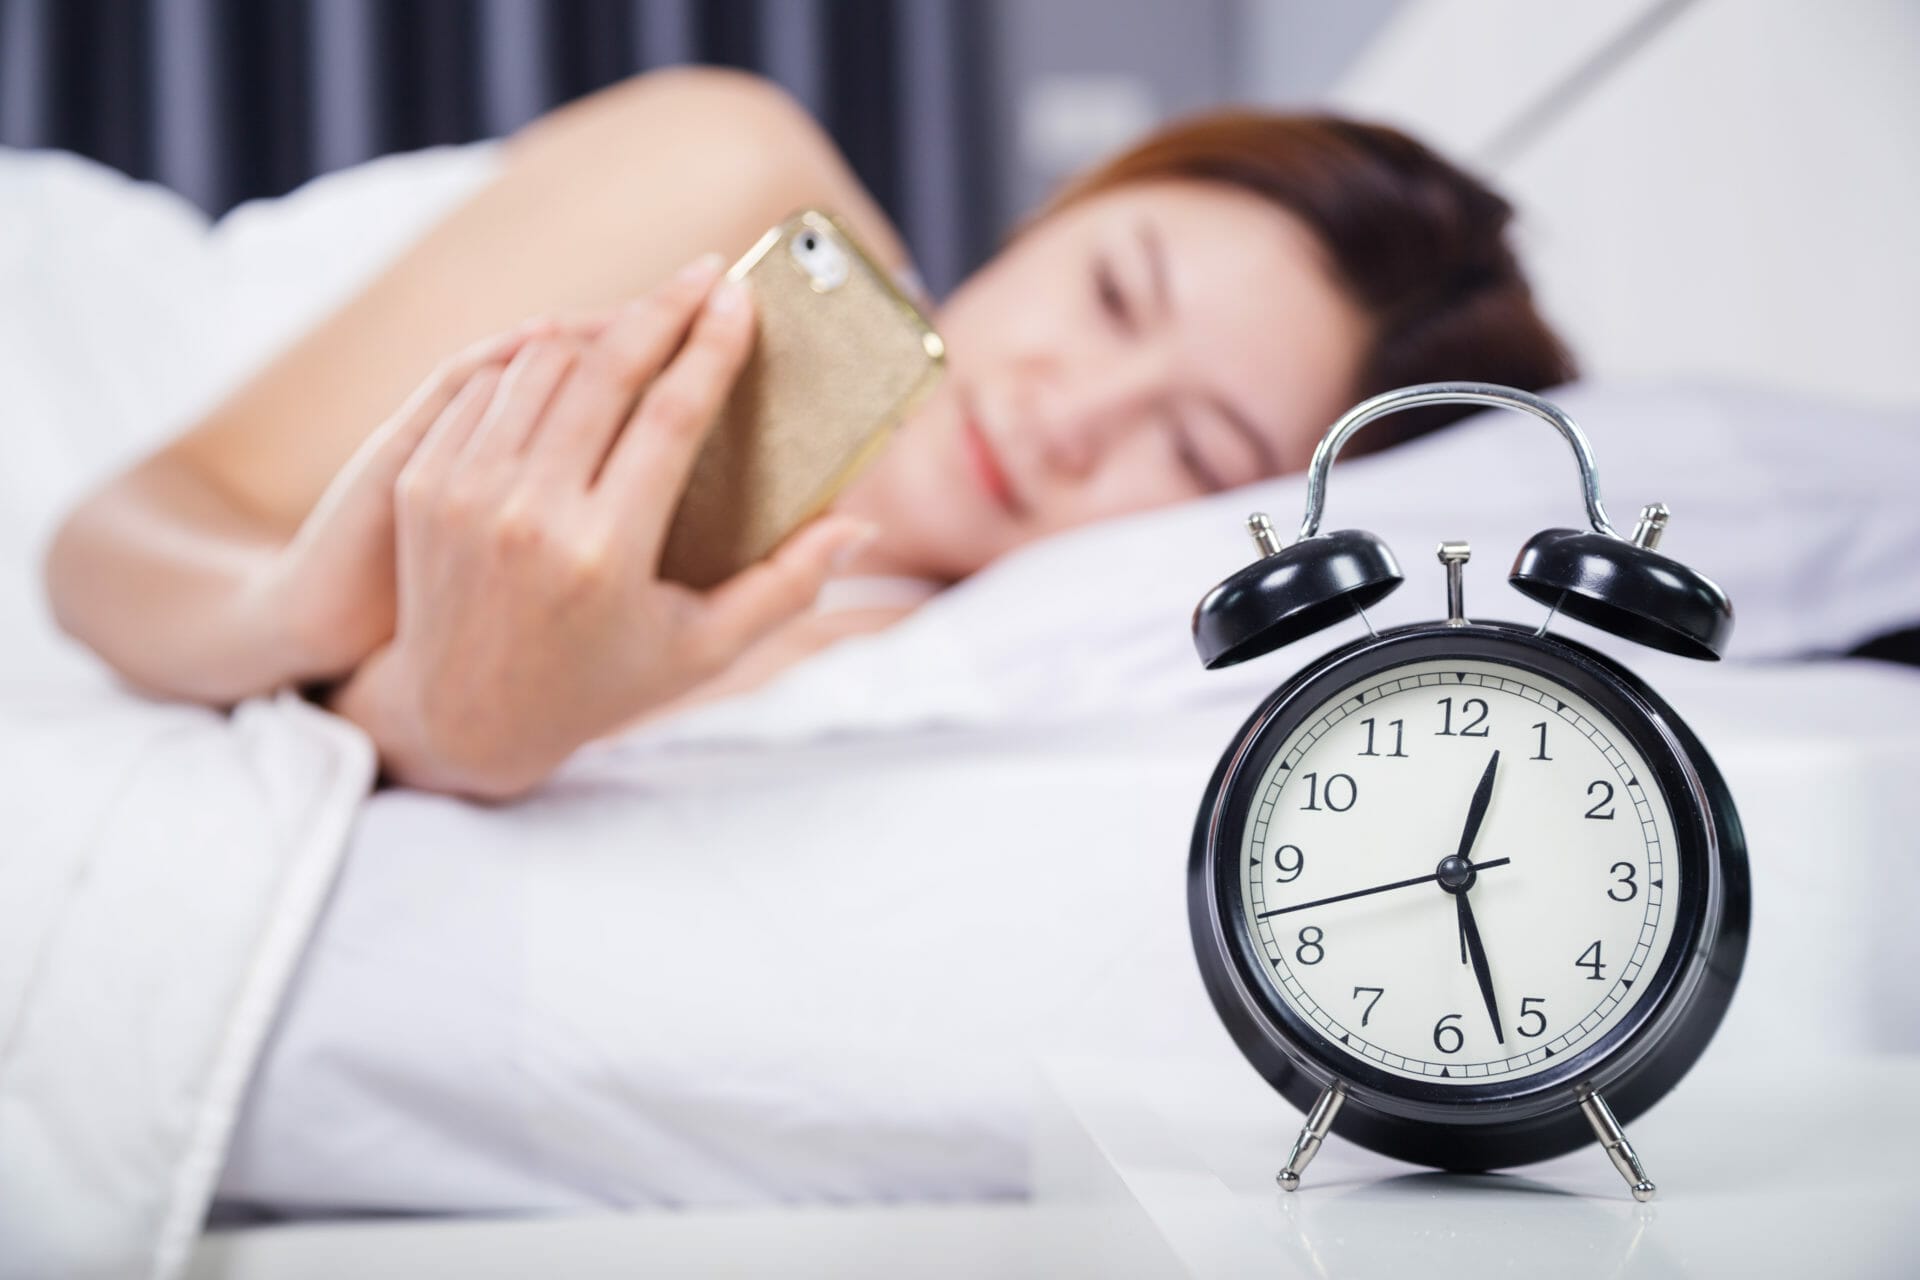 Sleeping in way past your usual wake time disrupts your circadian rhythm